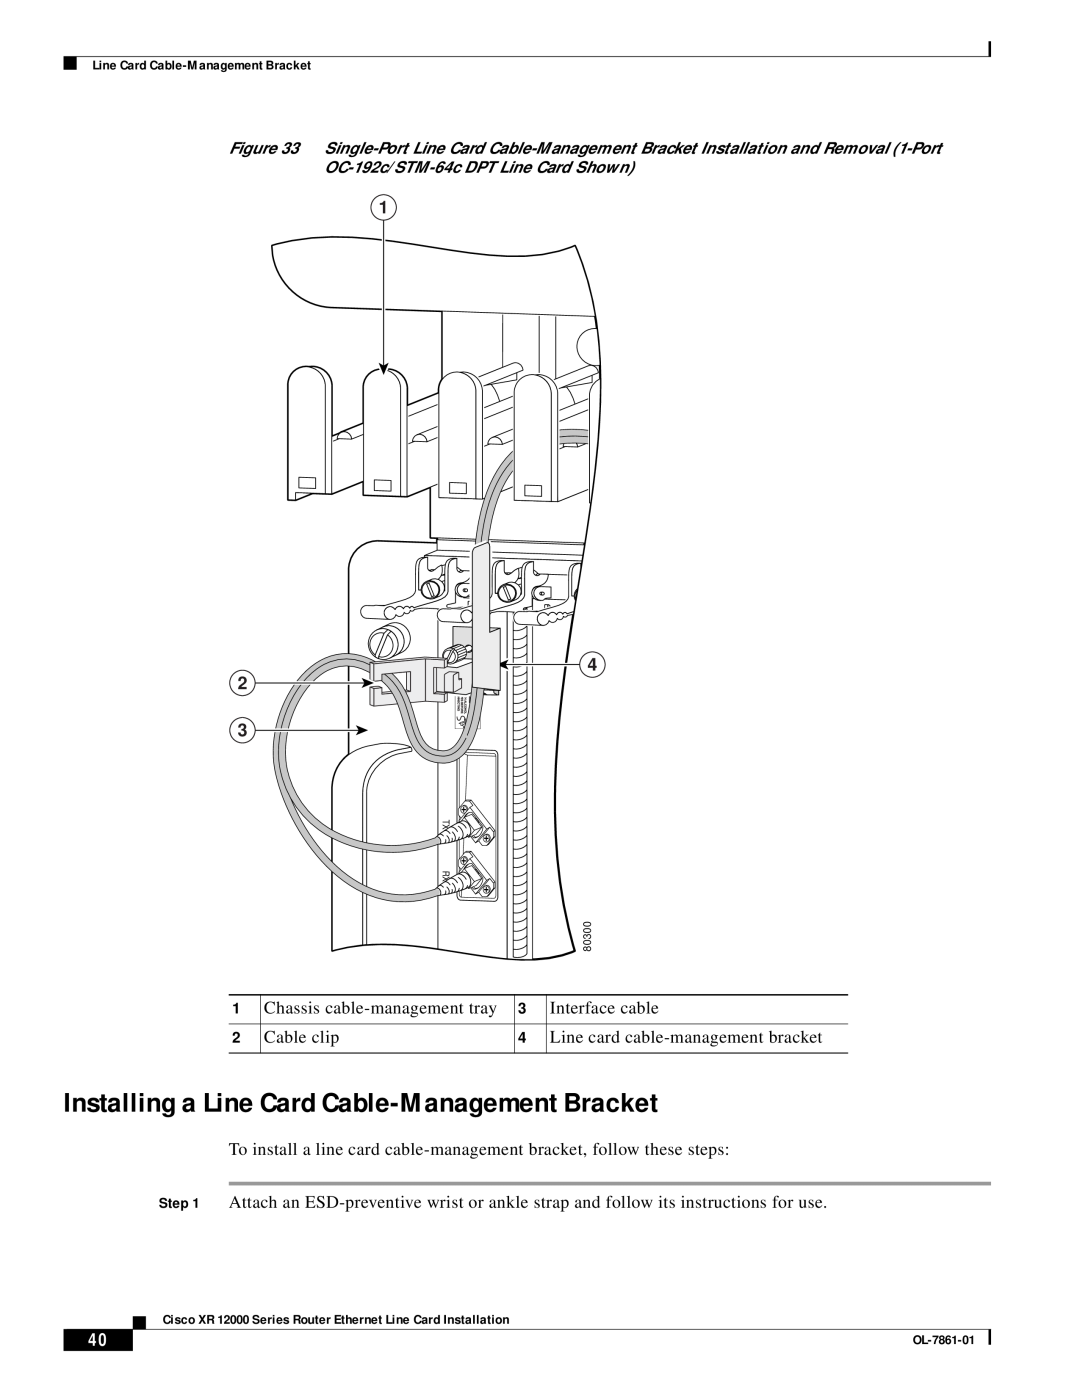 Cisco Systems OL-7861-01 manual Installing a Line Card Cable-Management Bracket, Tx Rx Rx 